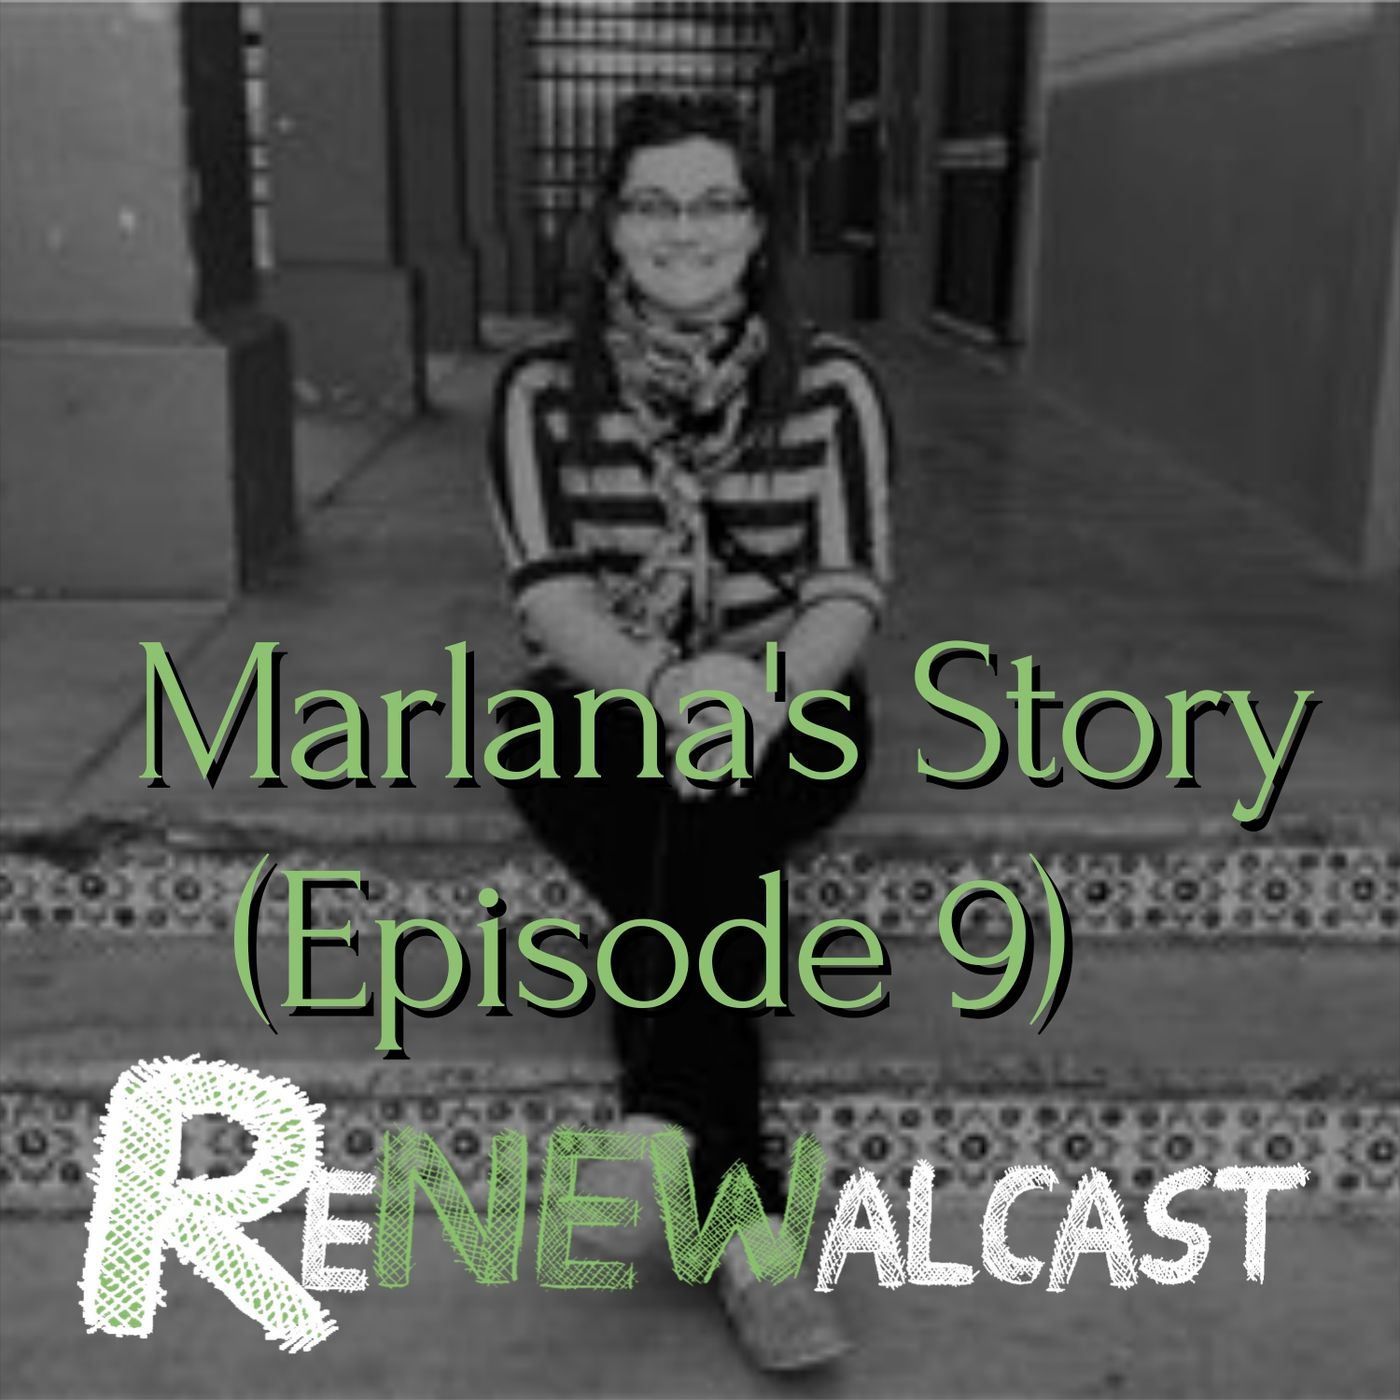 Marlana’s Story (Episode 9)